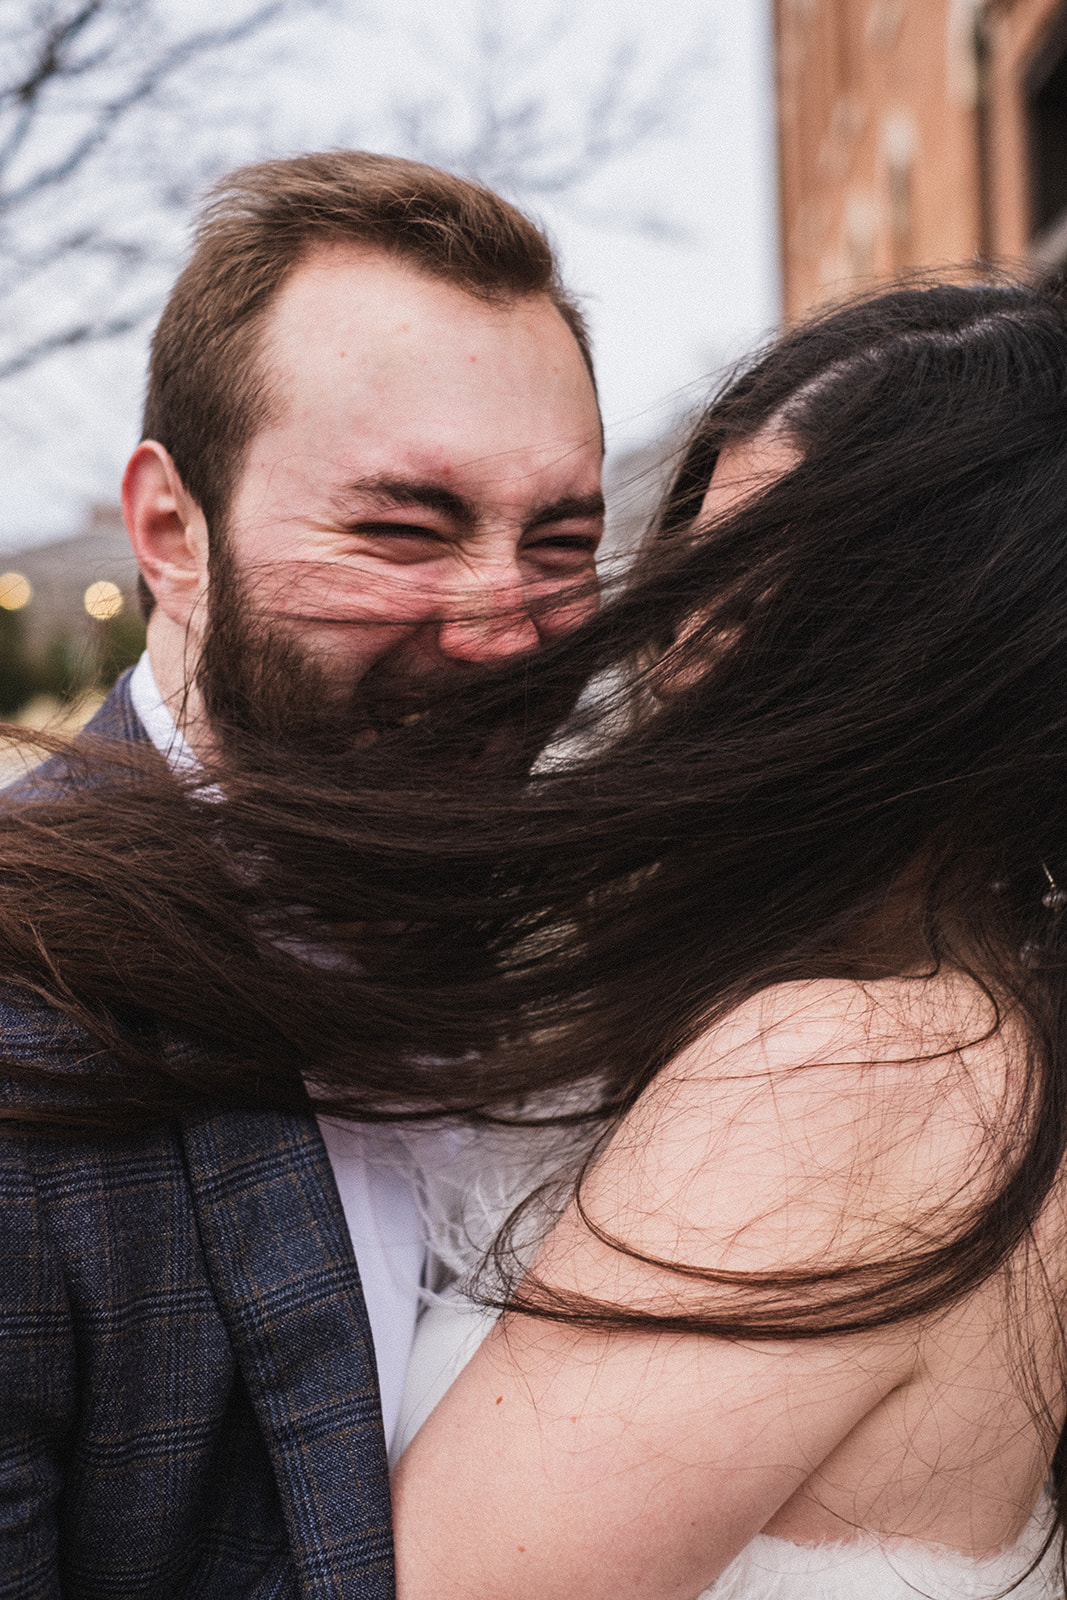 hair blown across both of their faces while taking engagement photos